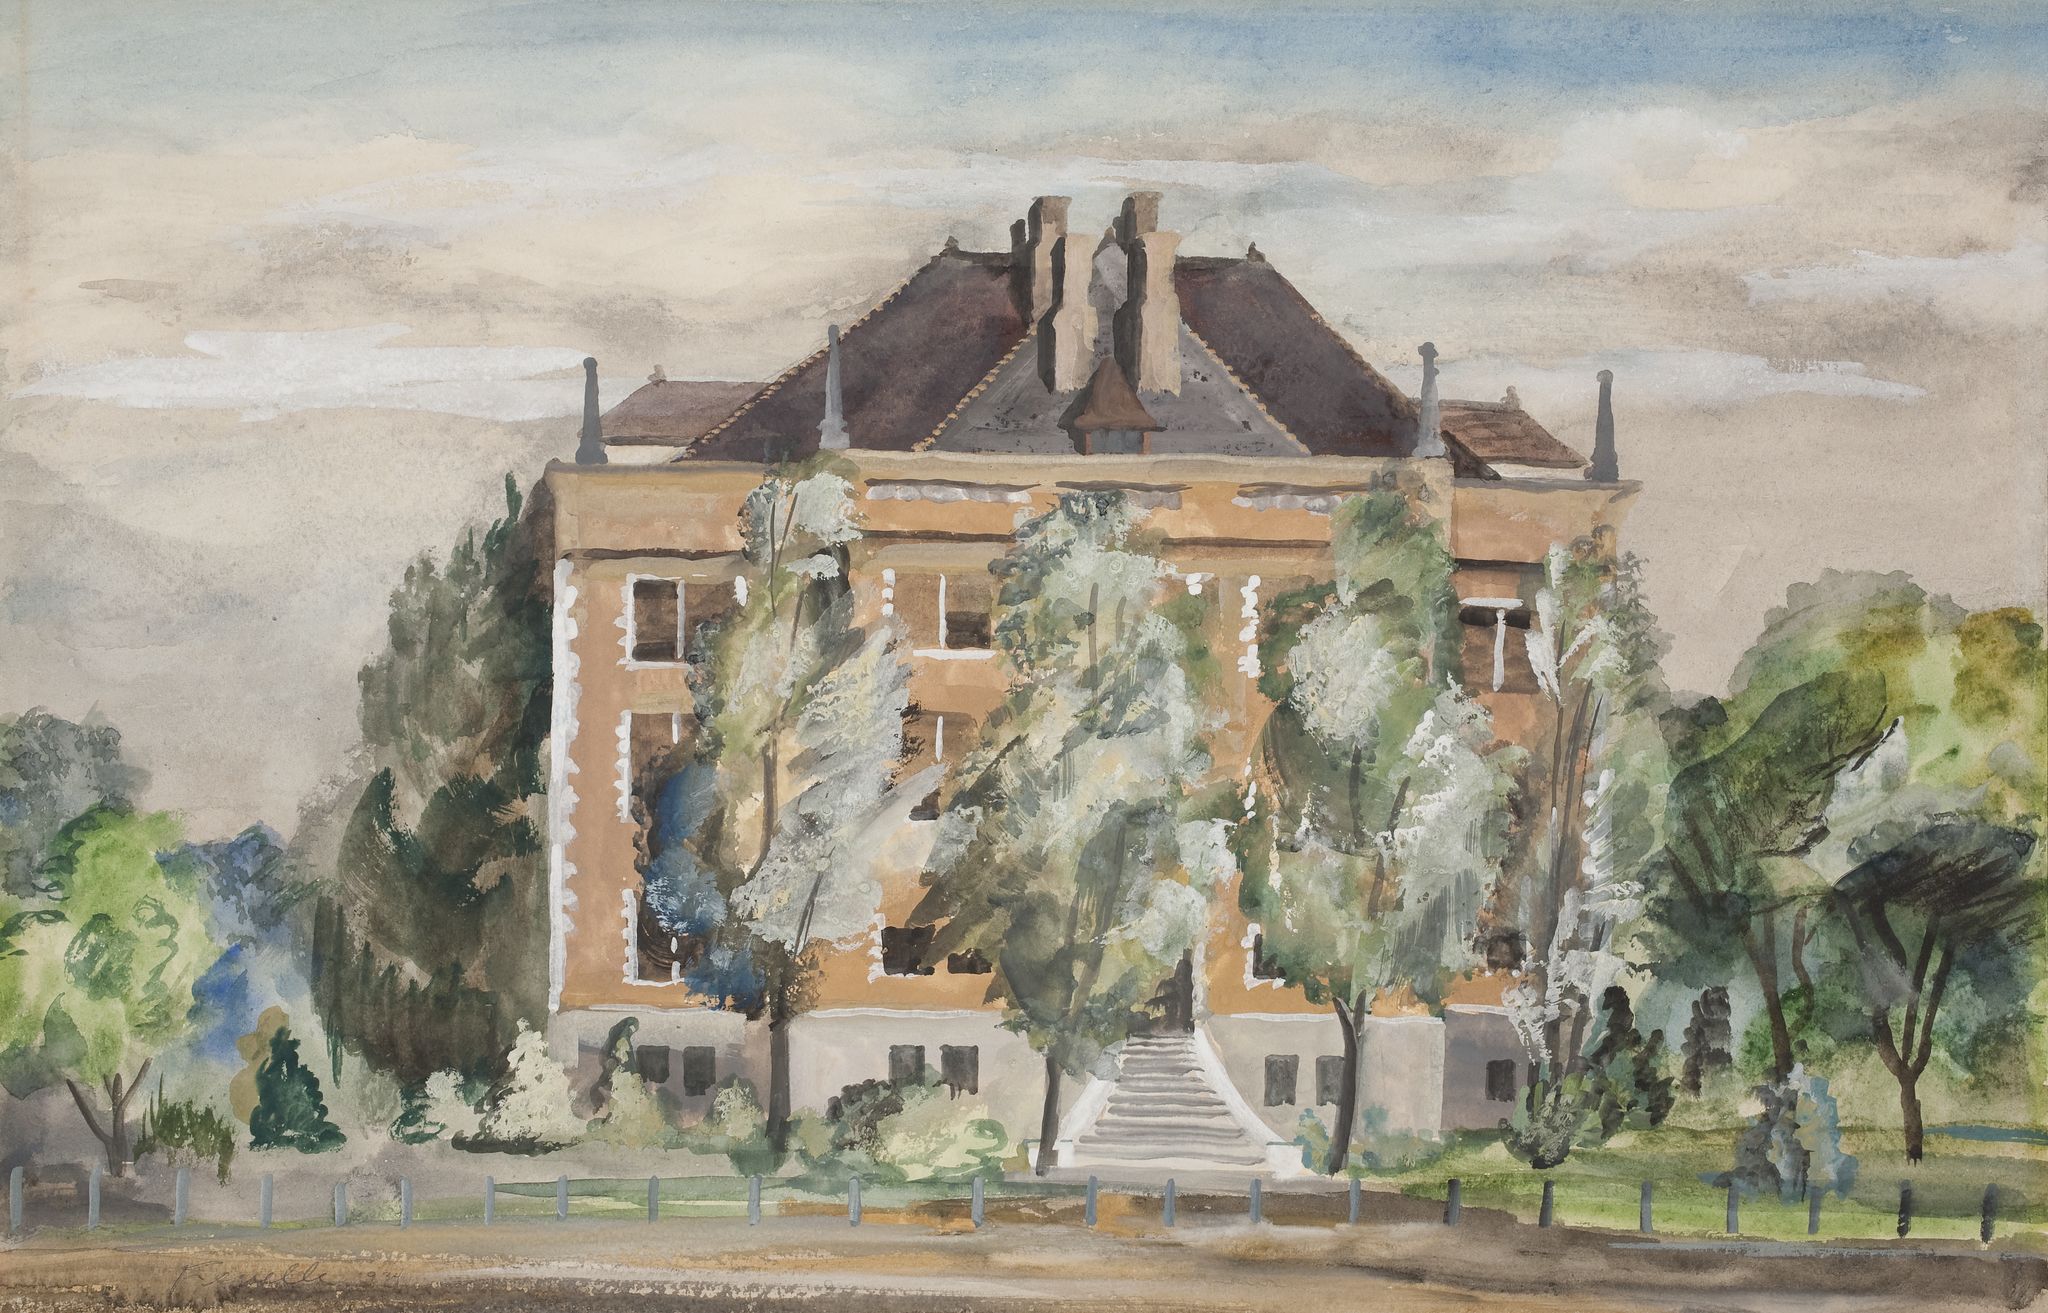 Painting of a building surrounded by trees